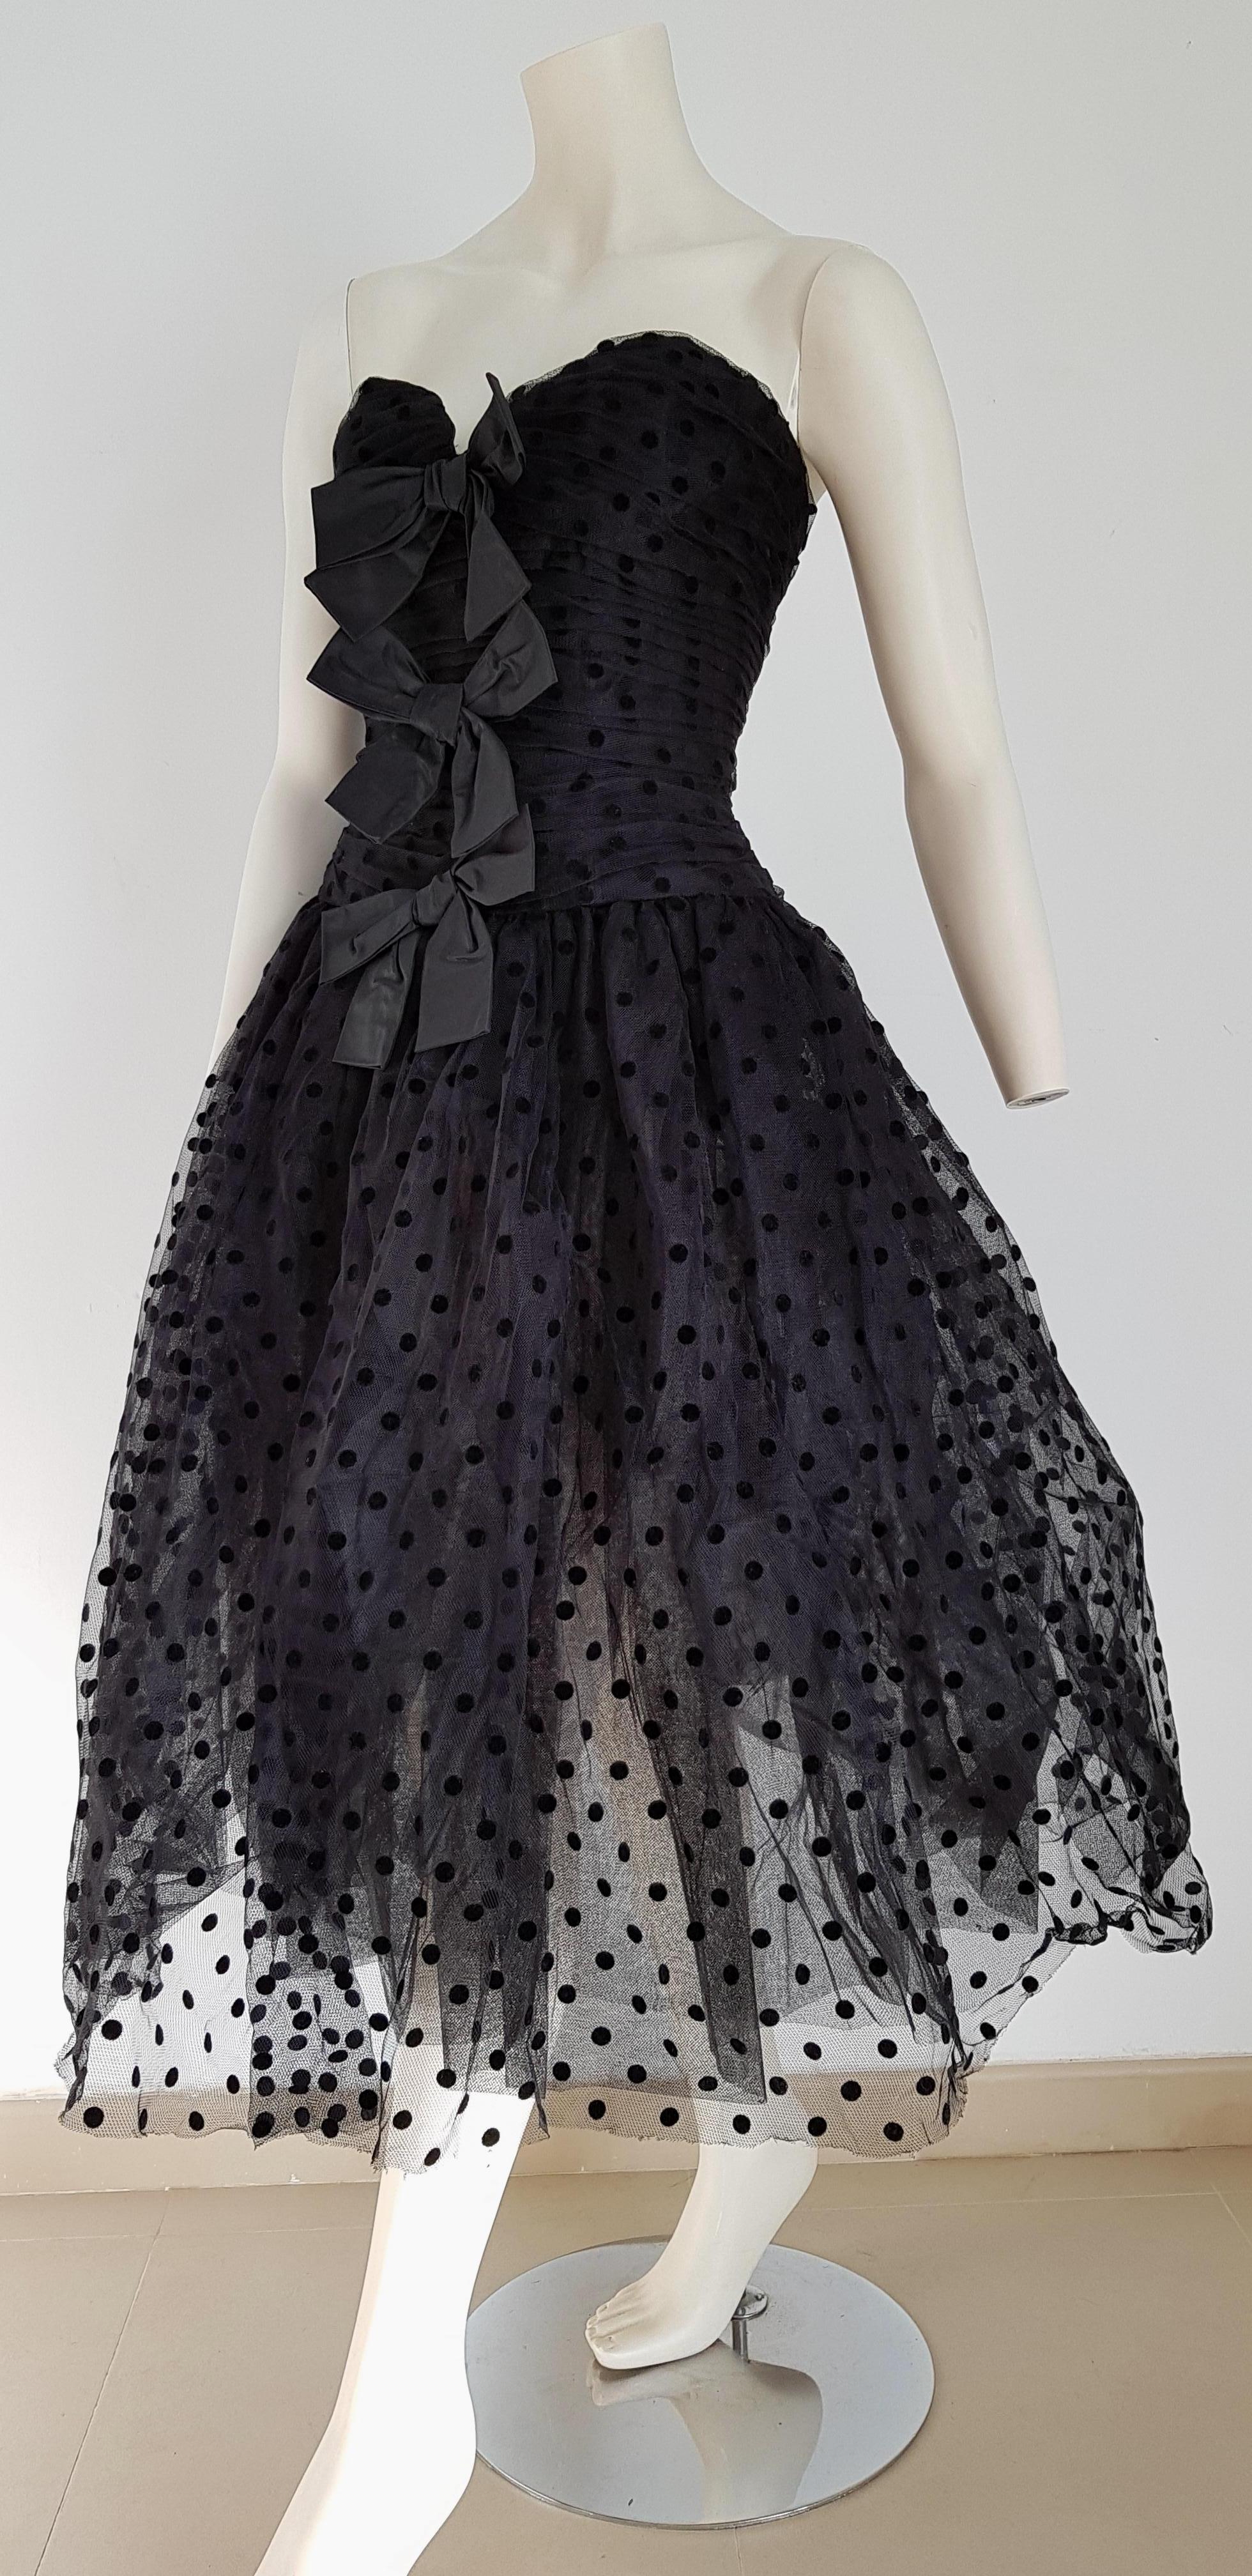 Isabelle ALLARD Paris, black velvet polka dots, plumetis black fabric, three knotted front ribbons, slightly transparent skirt, strapless dress - Unworn, New.

Isabelle ALLARD is a fashion designer that created only haute couture and selling to